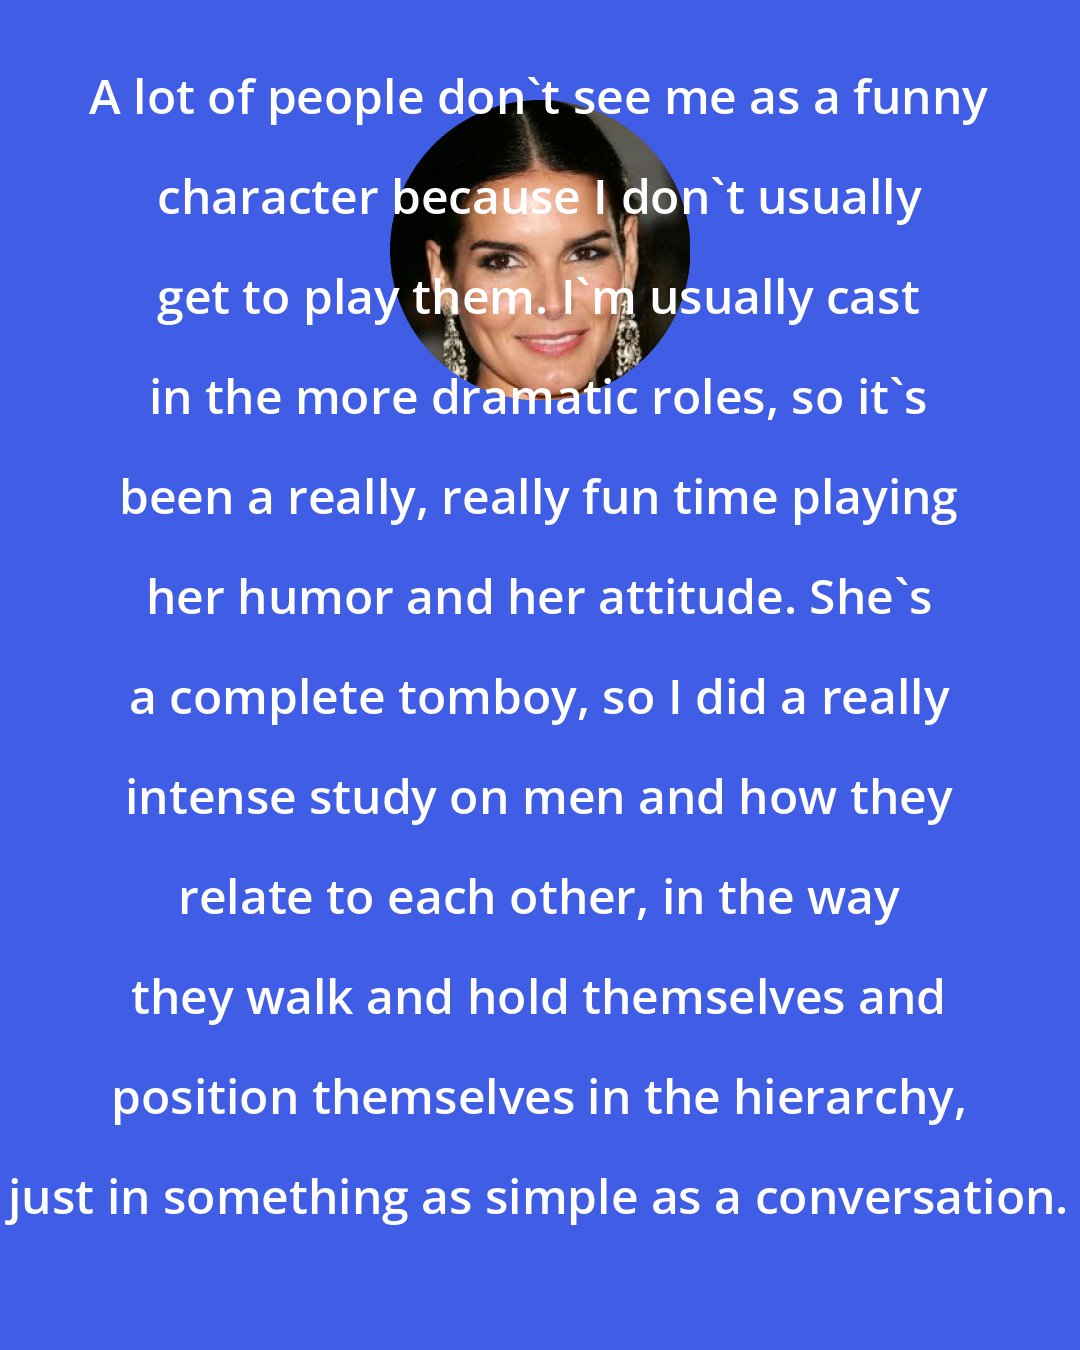 Angie Harmon: A lot of people don't see me as a funny character because I don't usually get to play them. I'm usually cast in the more dramatic roles, so it's been a really, really fun time playing her humor and her attitude. She's a complete tomboy, so I did a really intense study on men and how they relate to each other, in the way they walk and hold themselves and position themselves in the hierarchy, just in something as simple as a conversation.